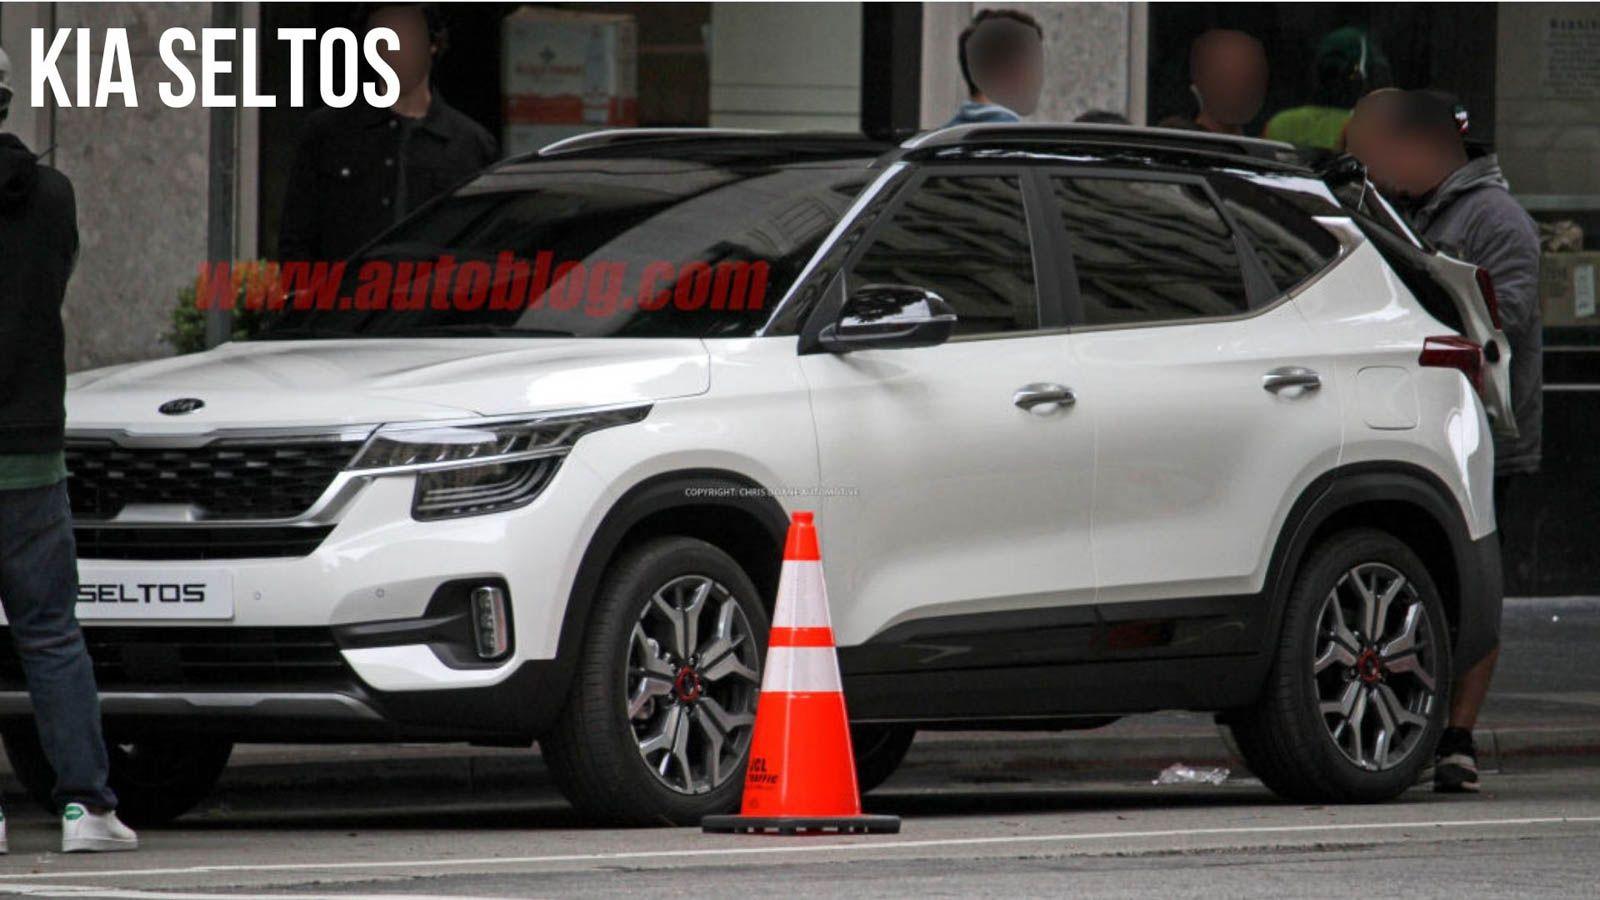 Seltos Is The Production Name of Kia SP SUV, Spied Undisguised On